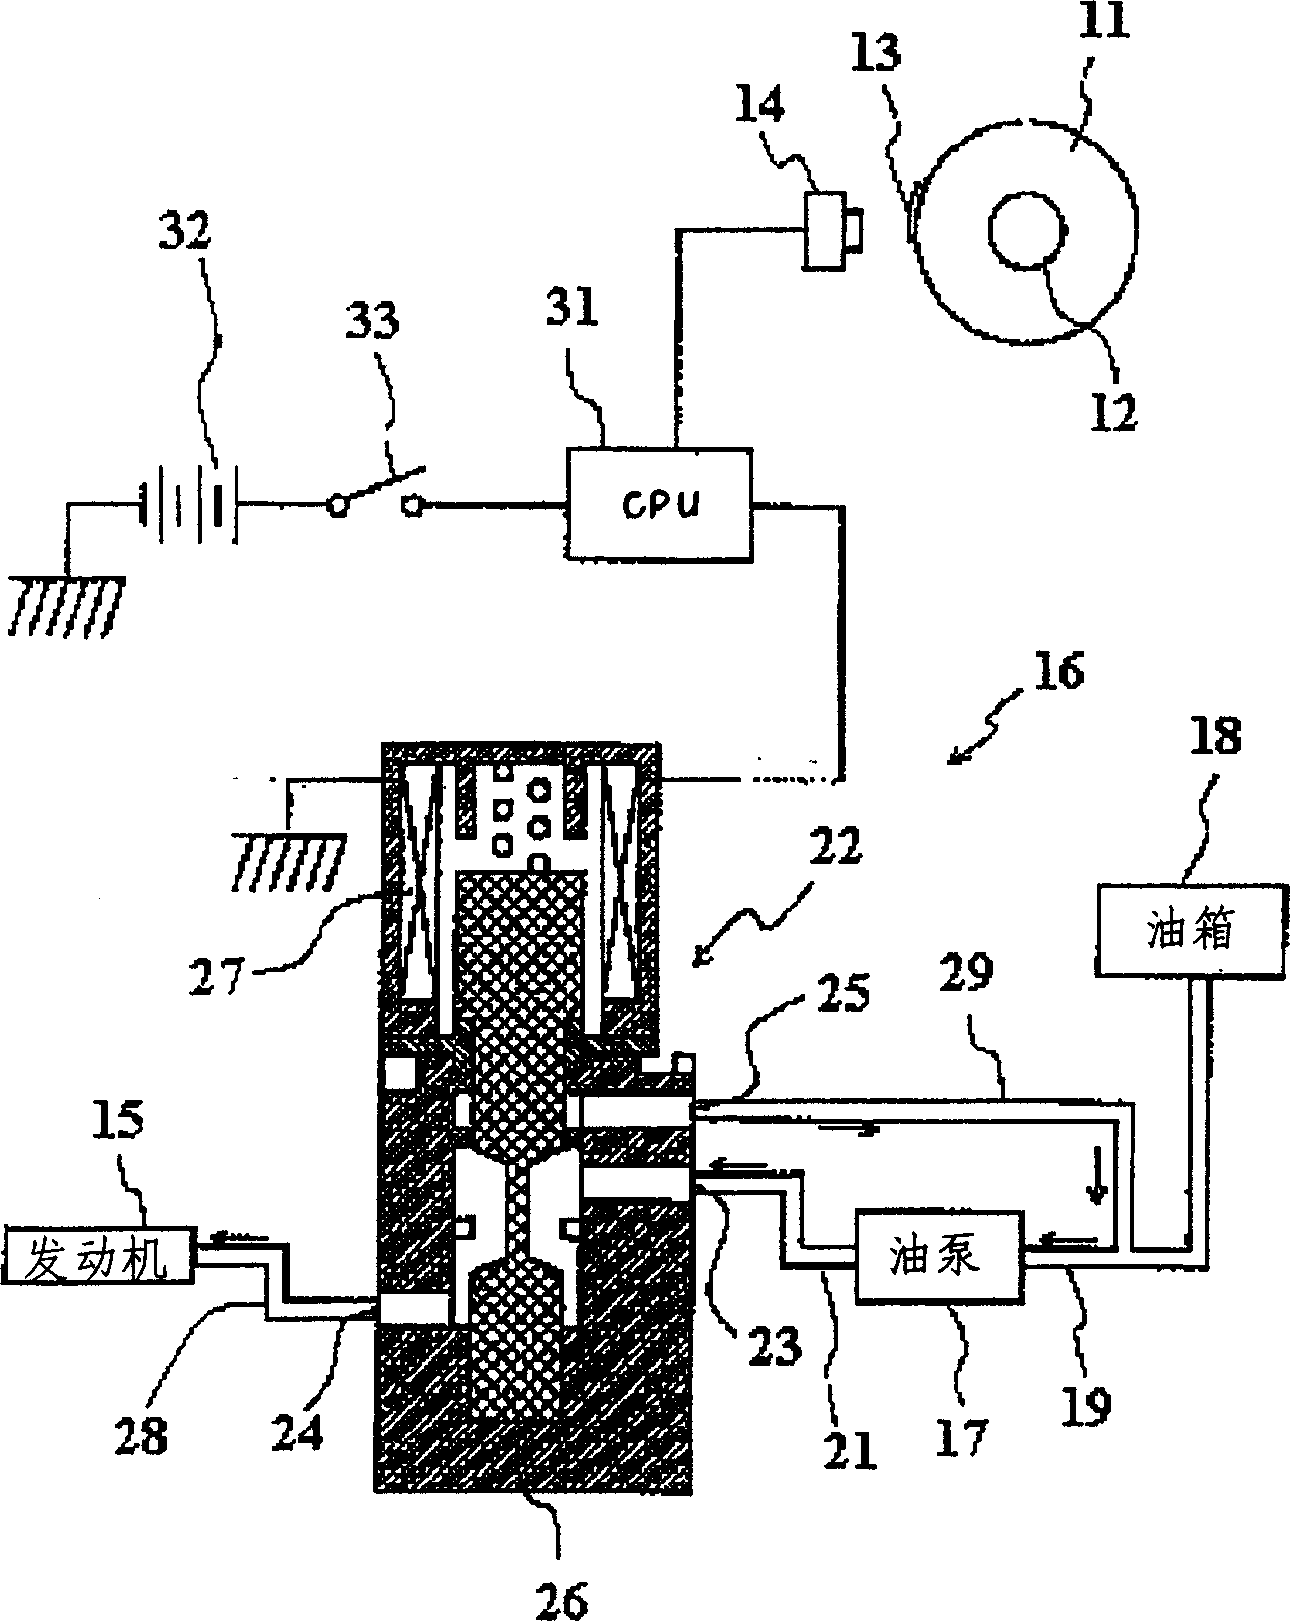 Oil Controller for two-stroke engine